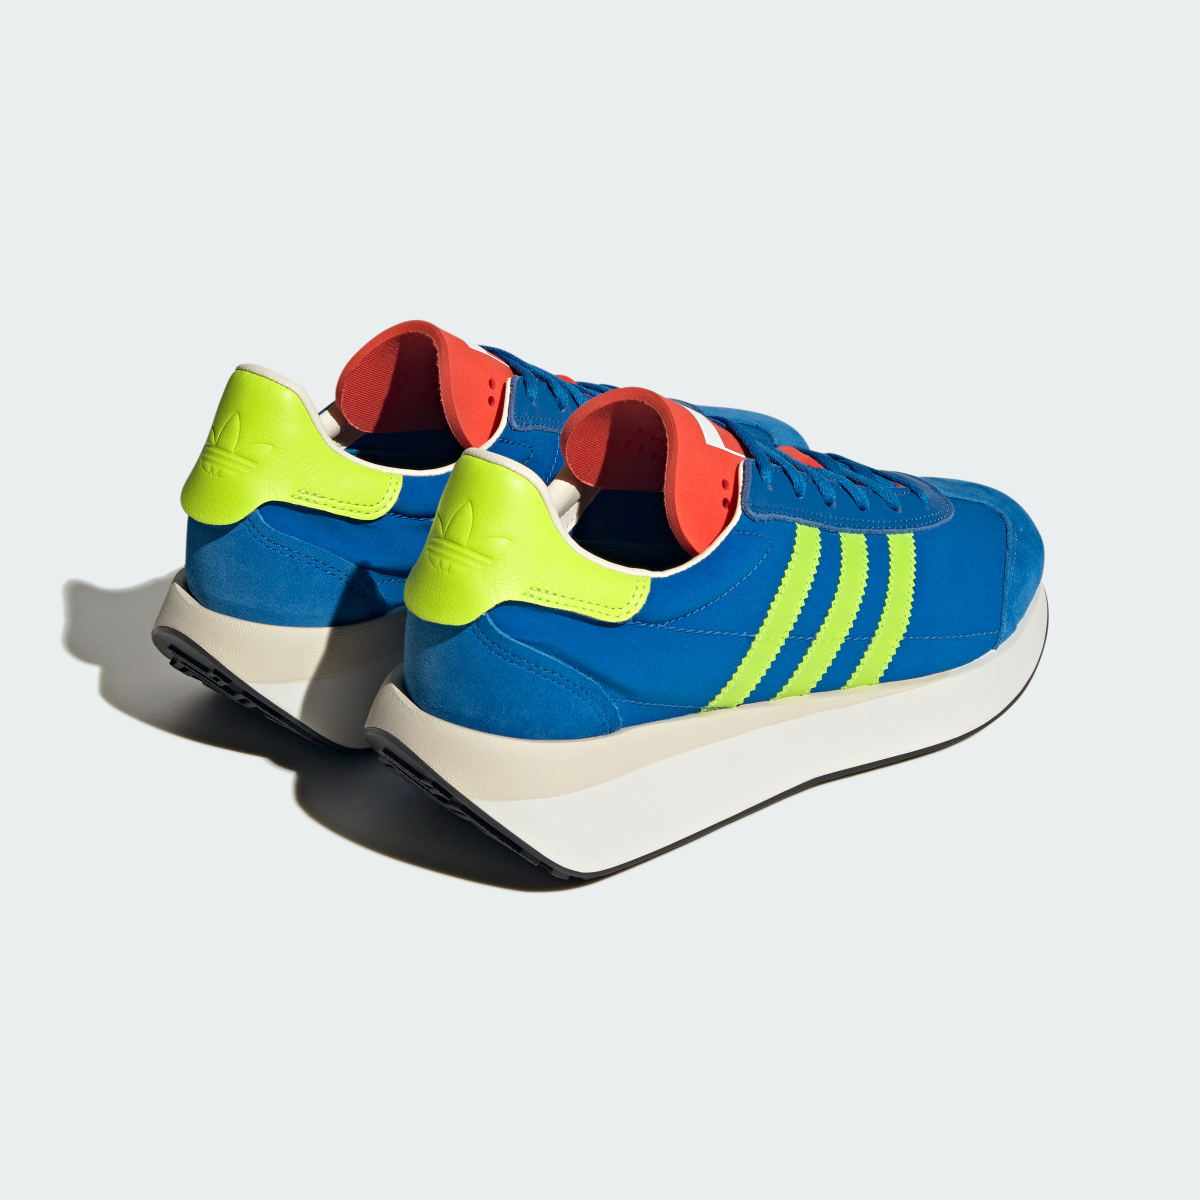 Adidas Country XLG Shoes. 6